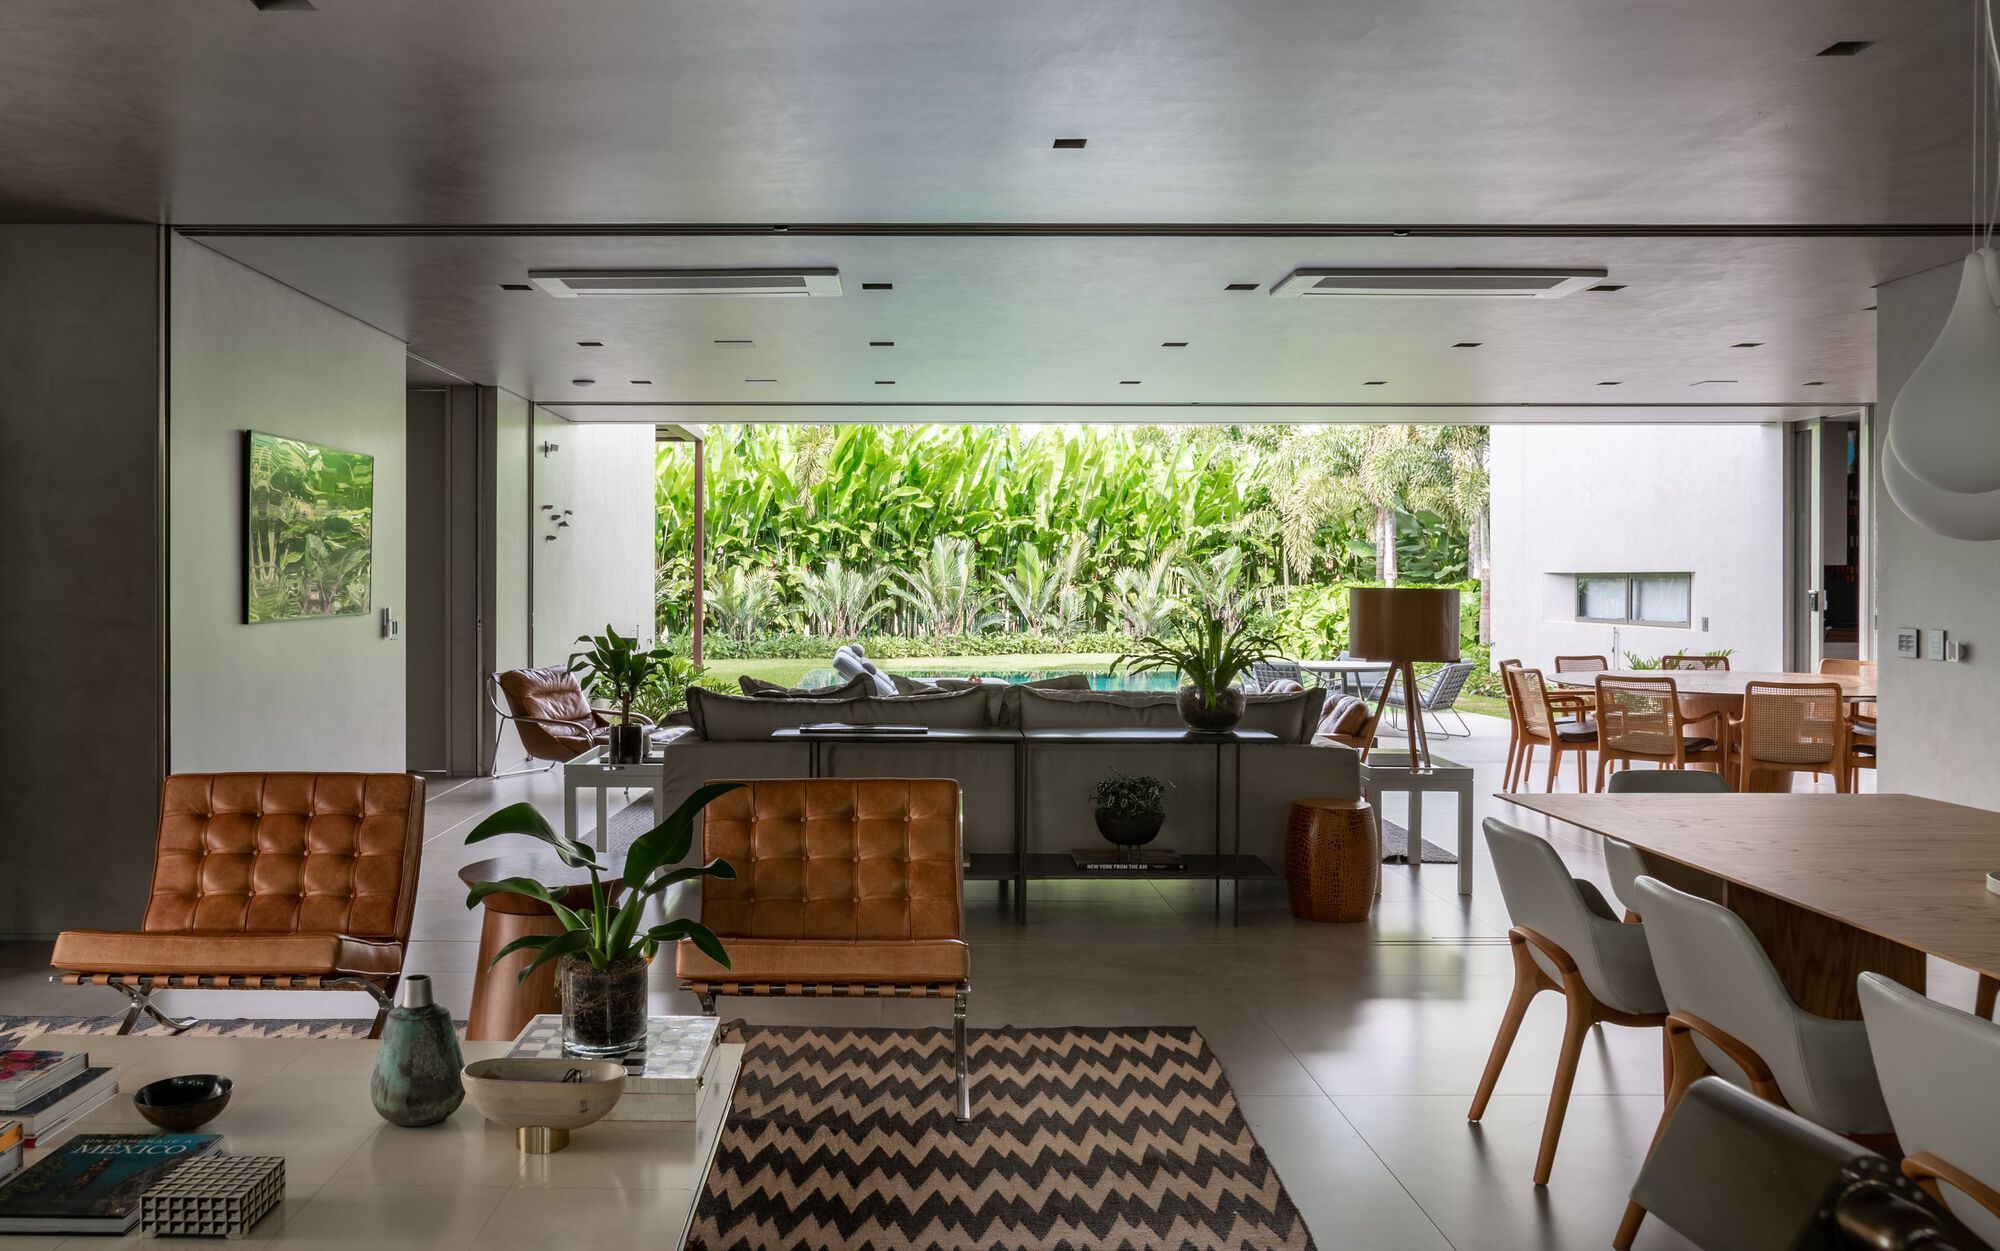 House H.L, a Contemporary Open Home by Celso Laetano Arquitetura (18)